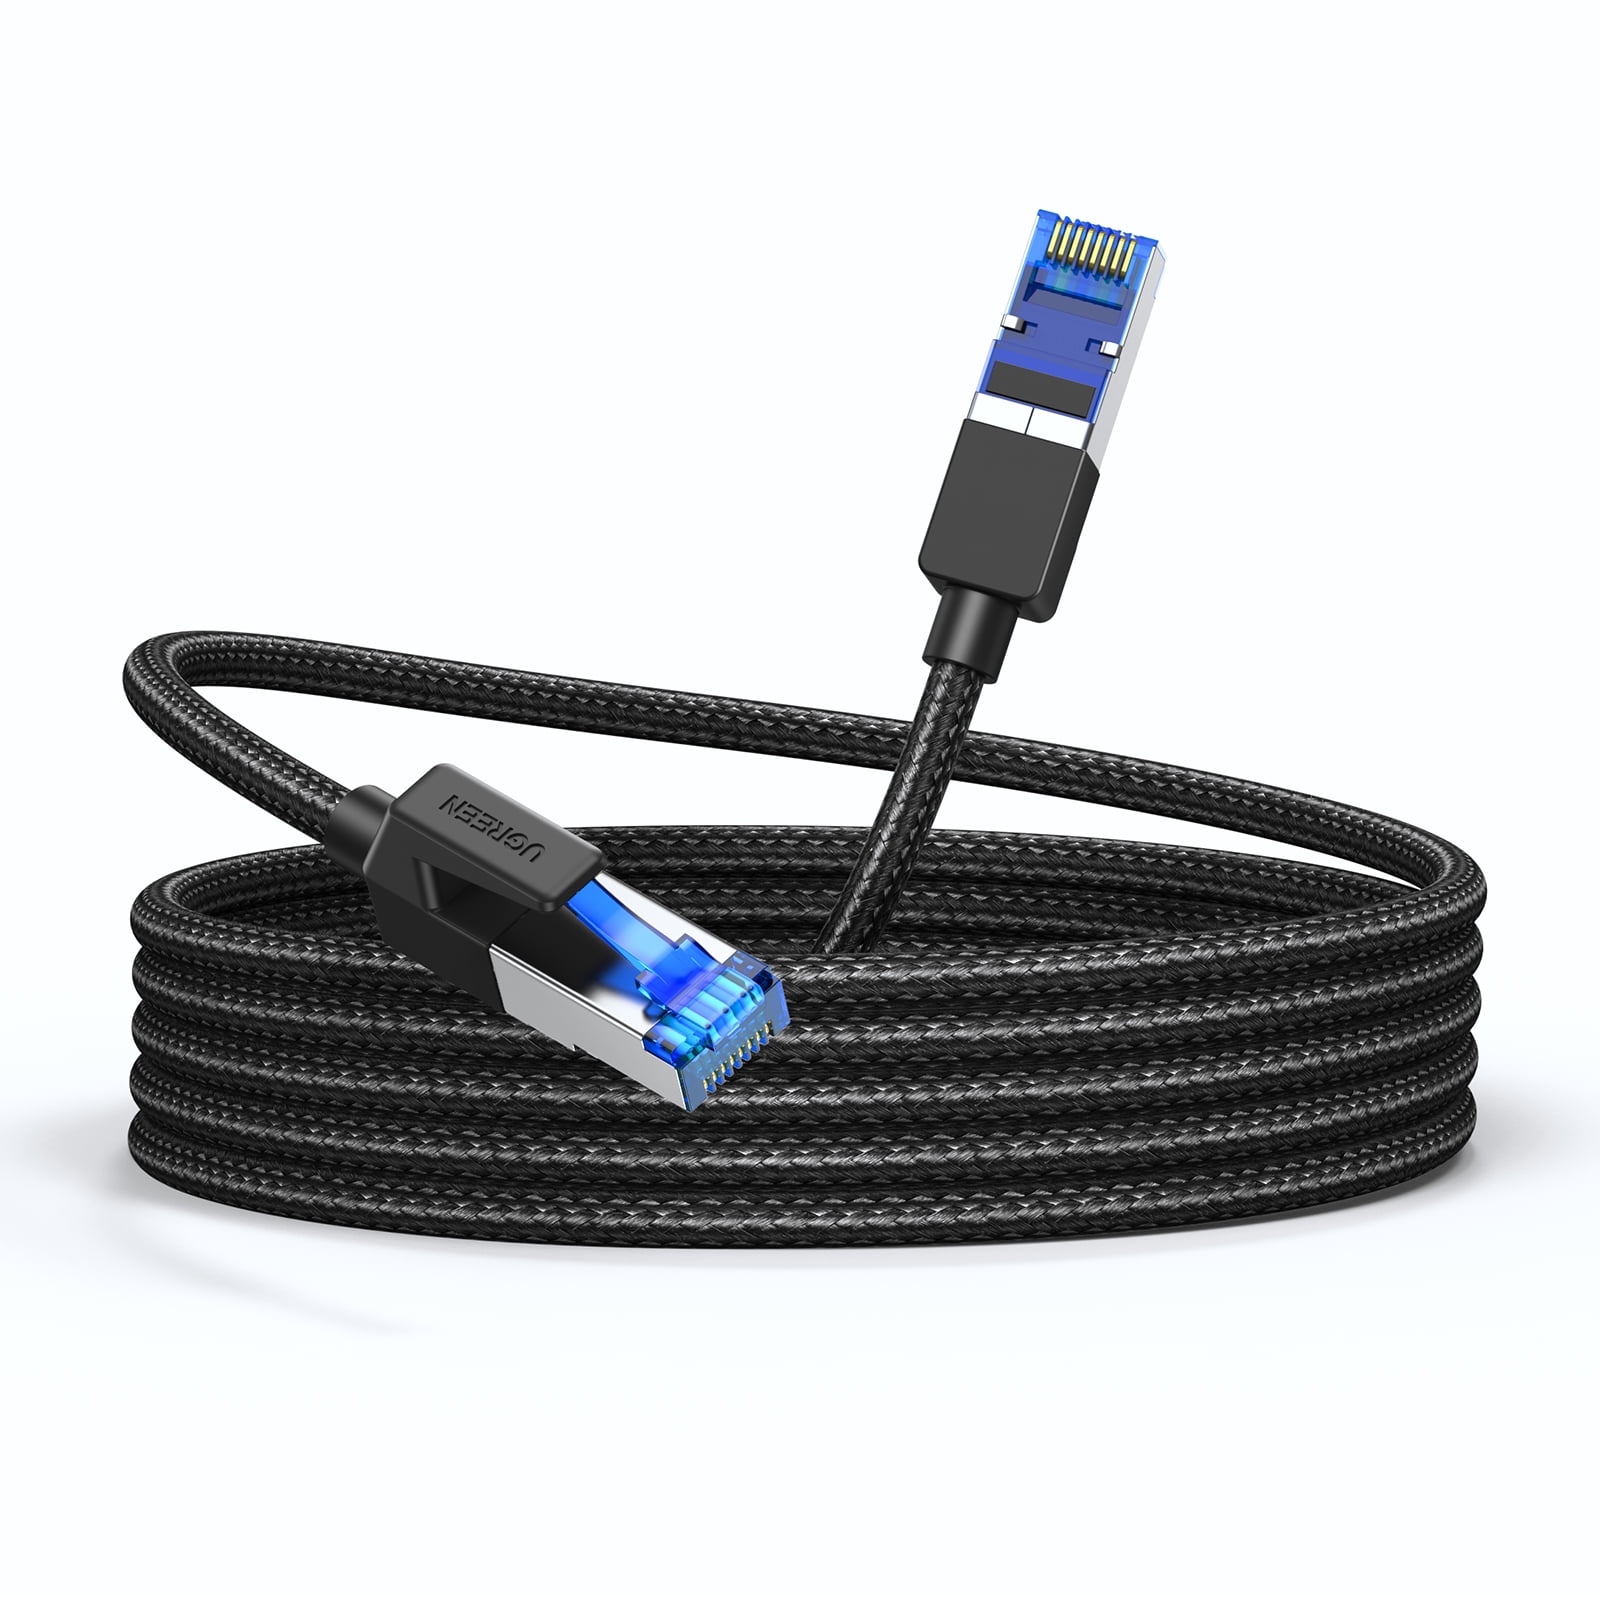 Yauhody Cat8 Ethernet Cable 50FT, 40Gbps High Speed Gaming LAN Cable for  PS5,PS4,X box S,Xbox X,Switch,PC